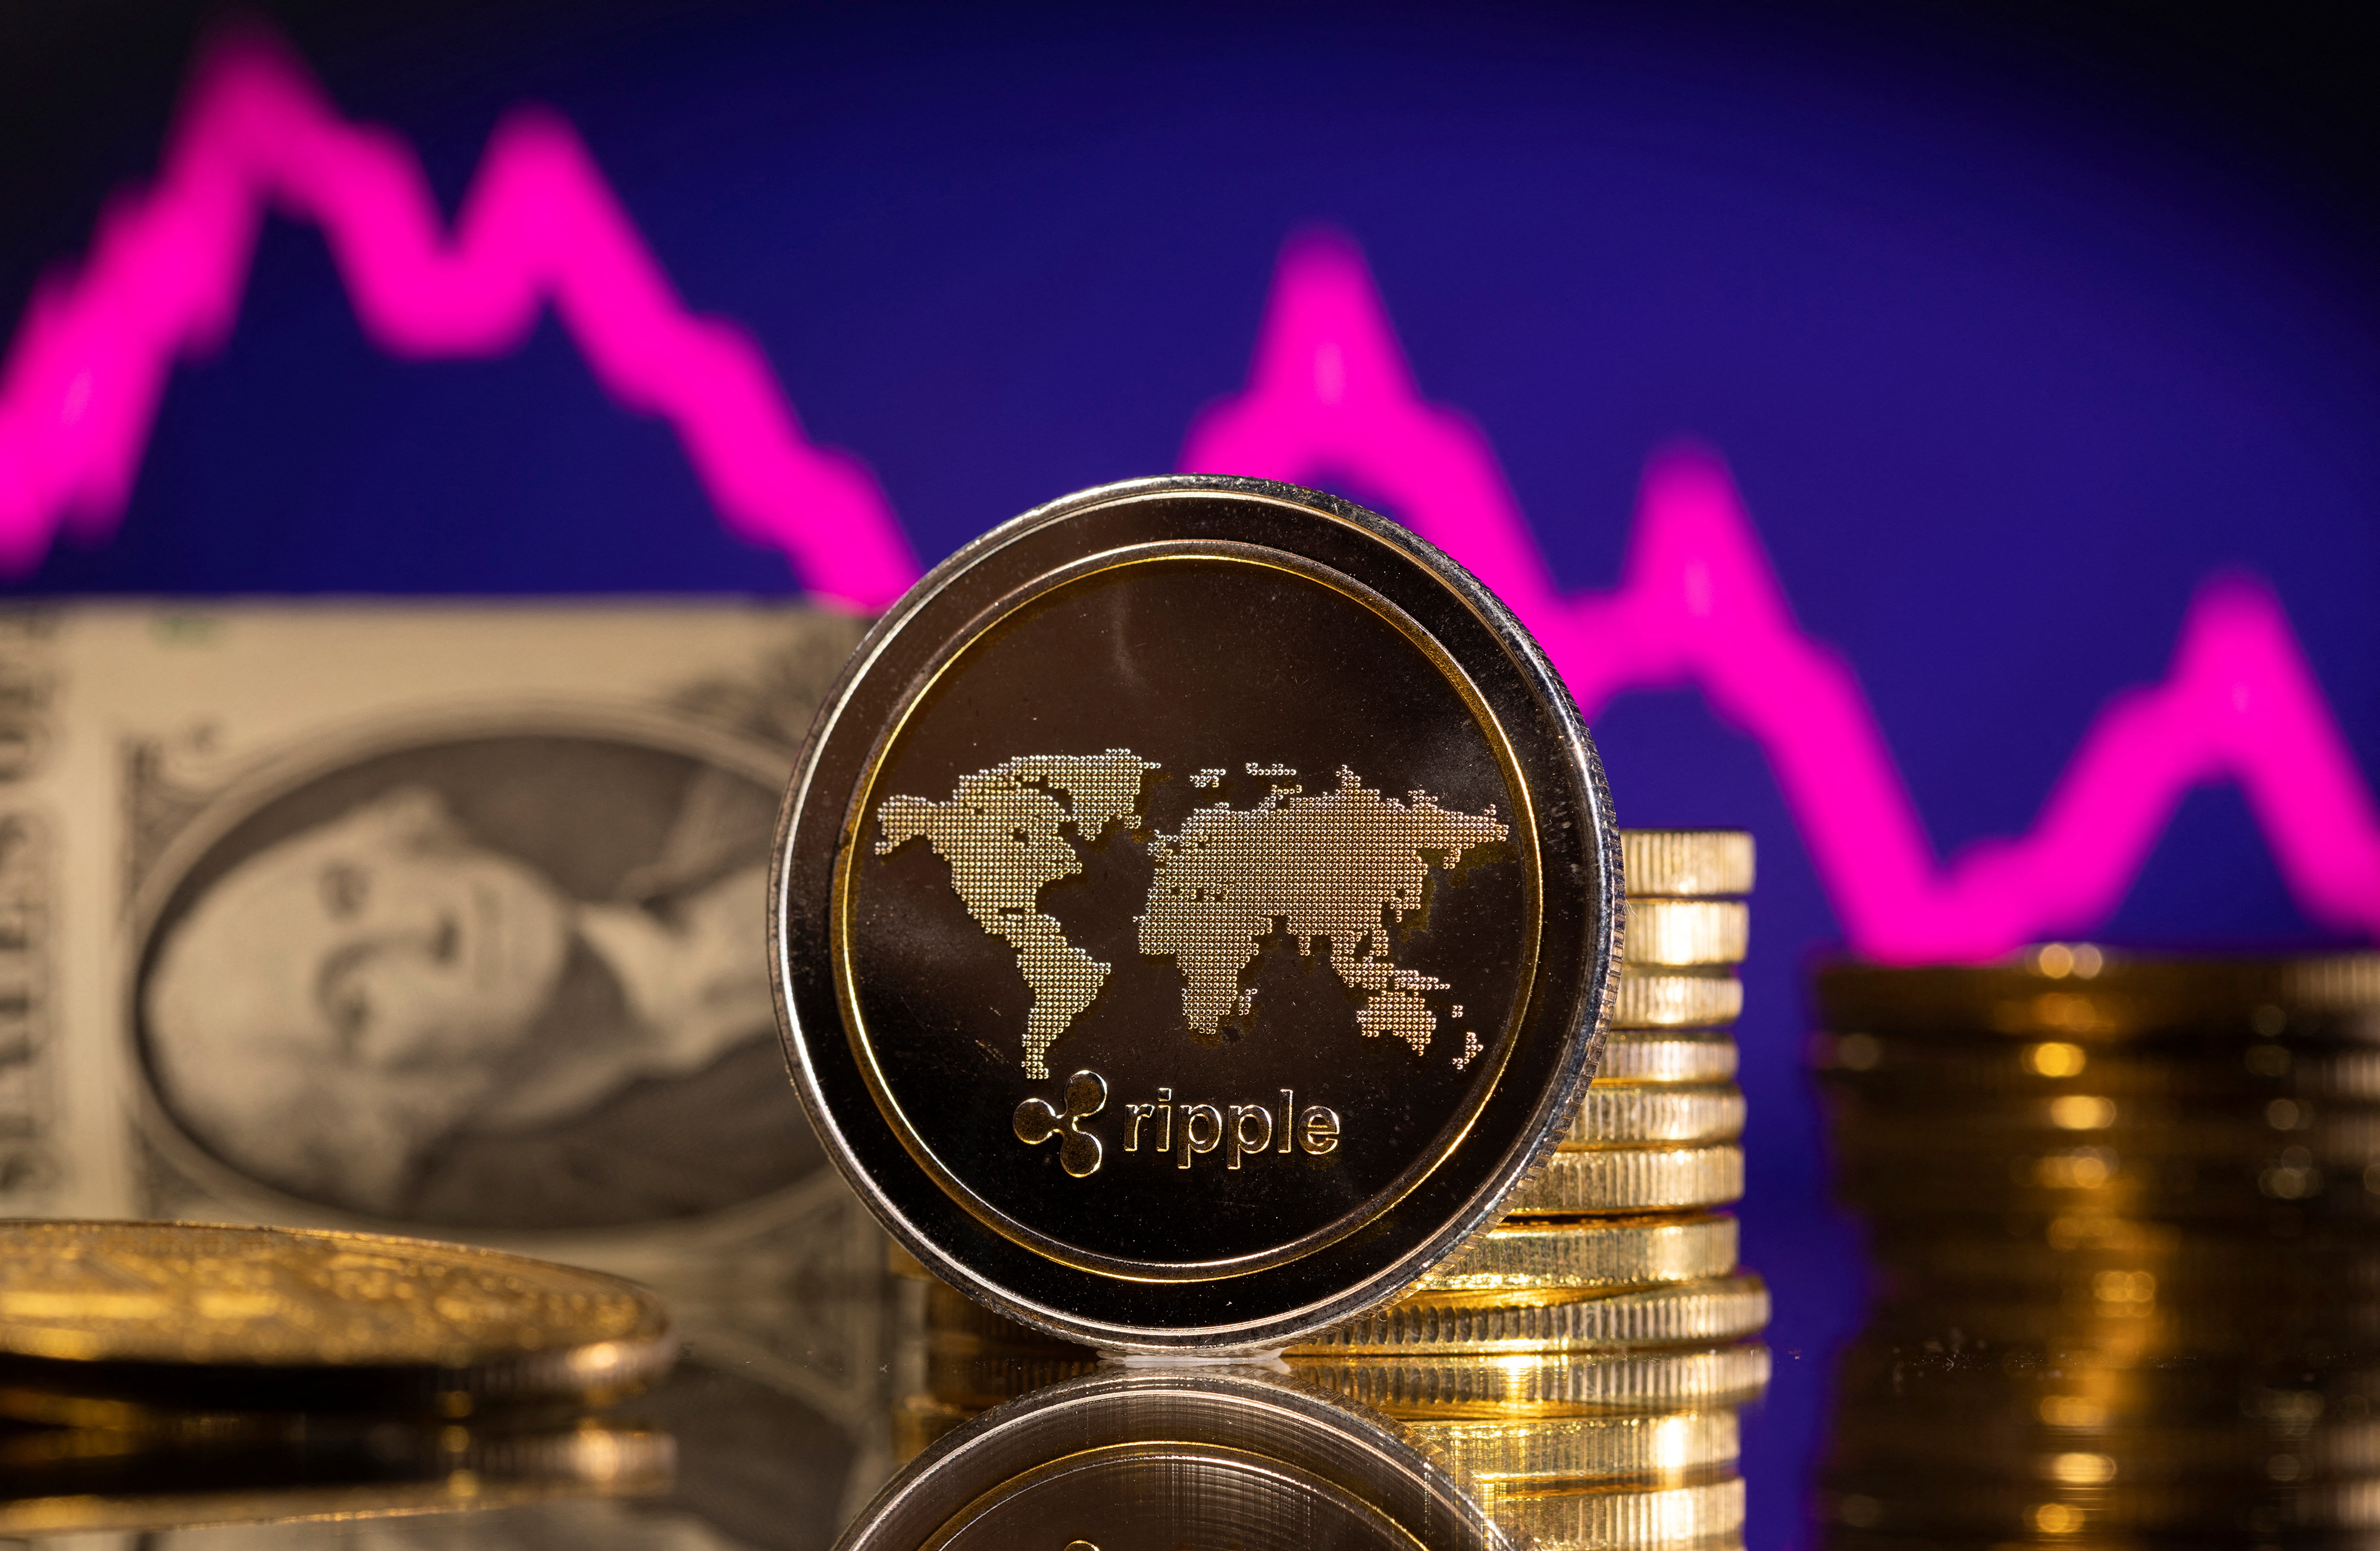 Ripple to buy back $285 million of its shares, valuing company at